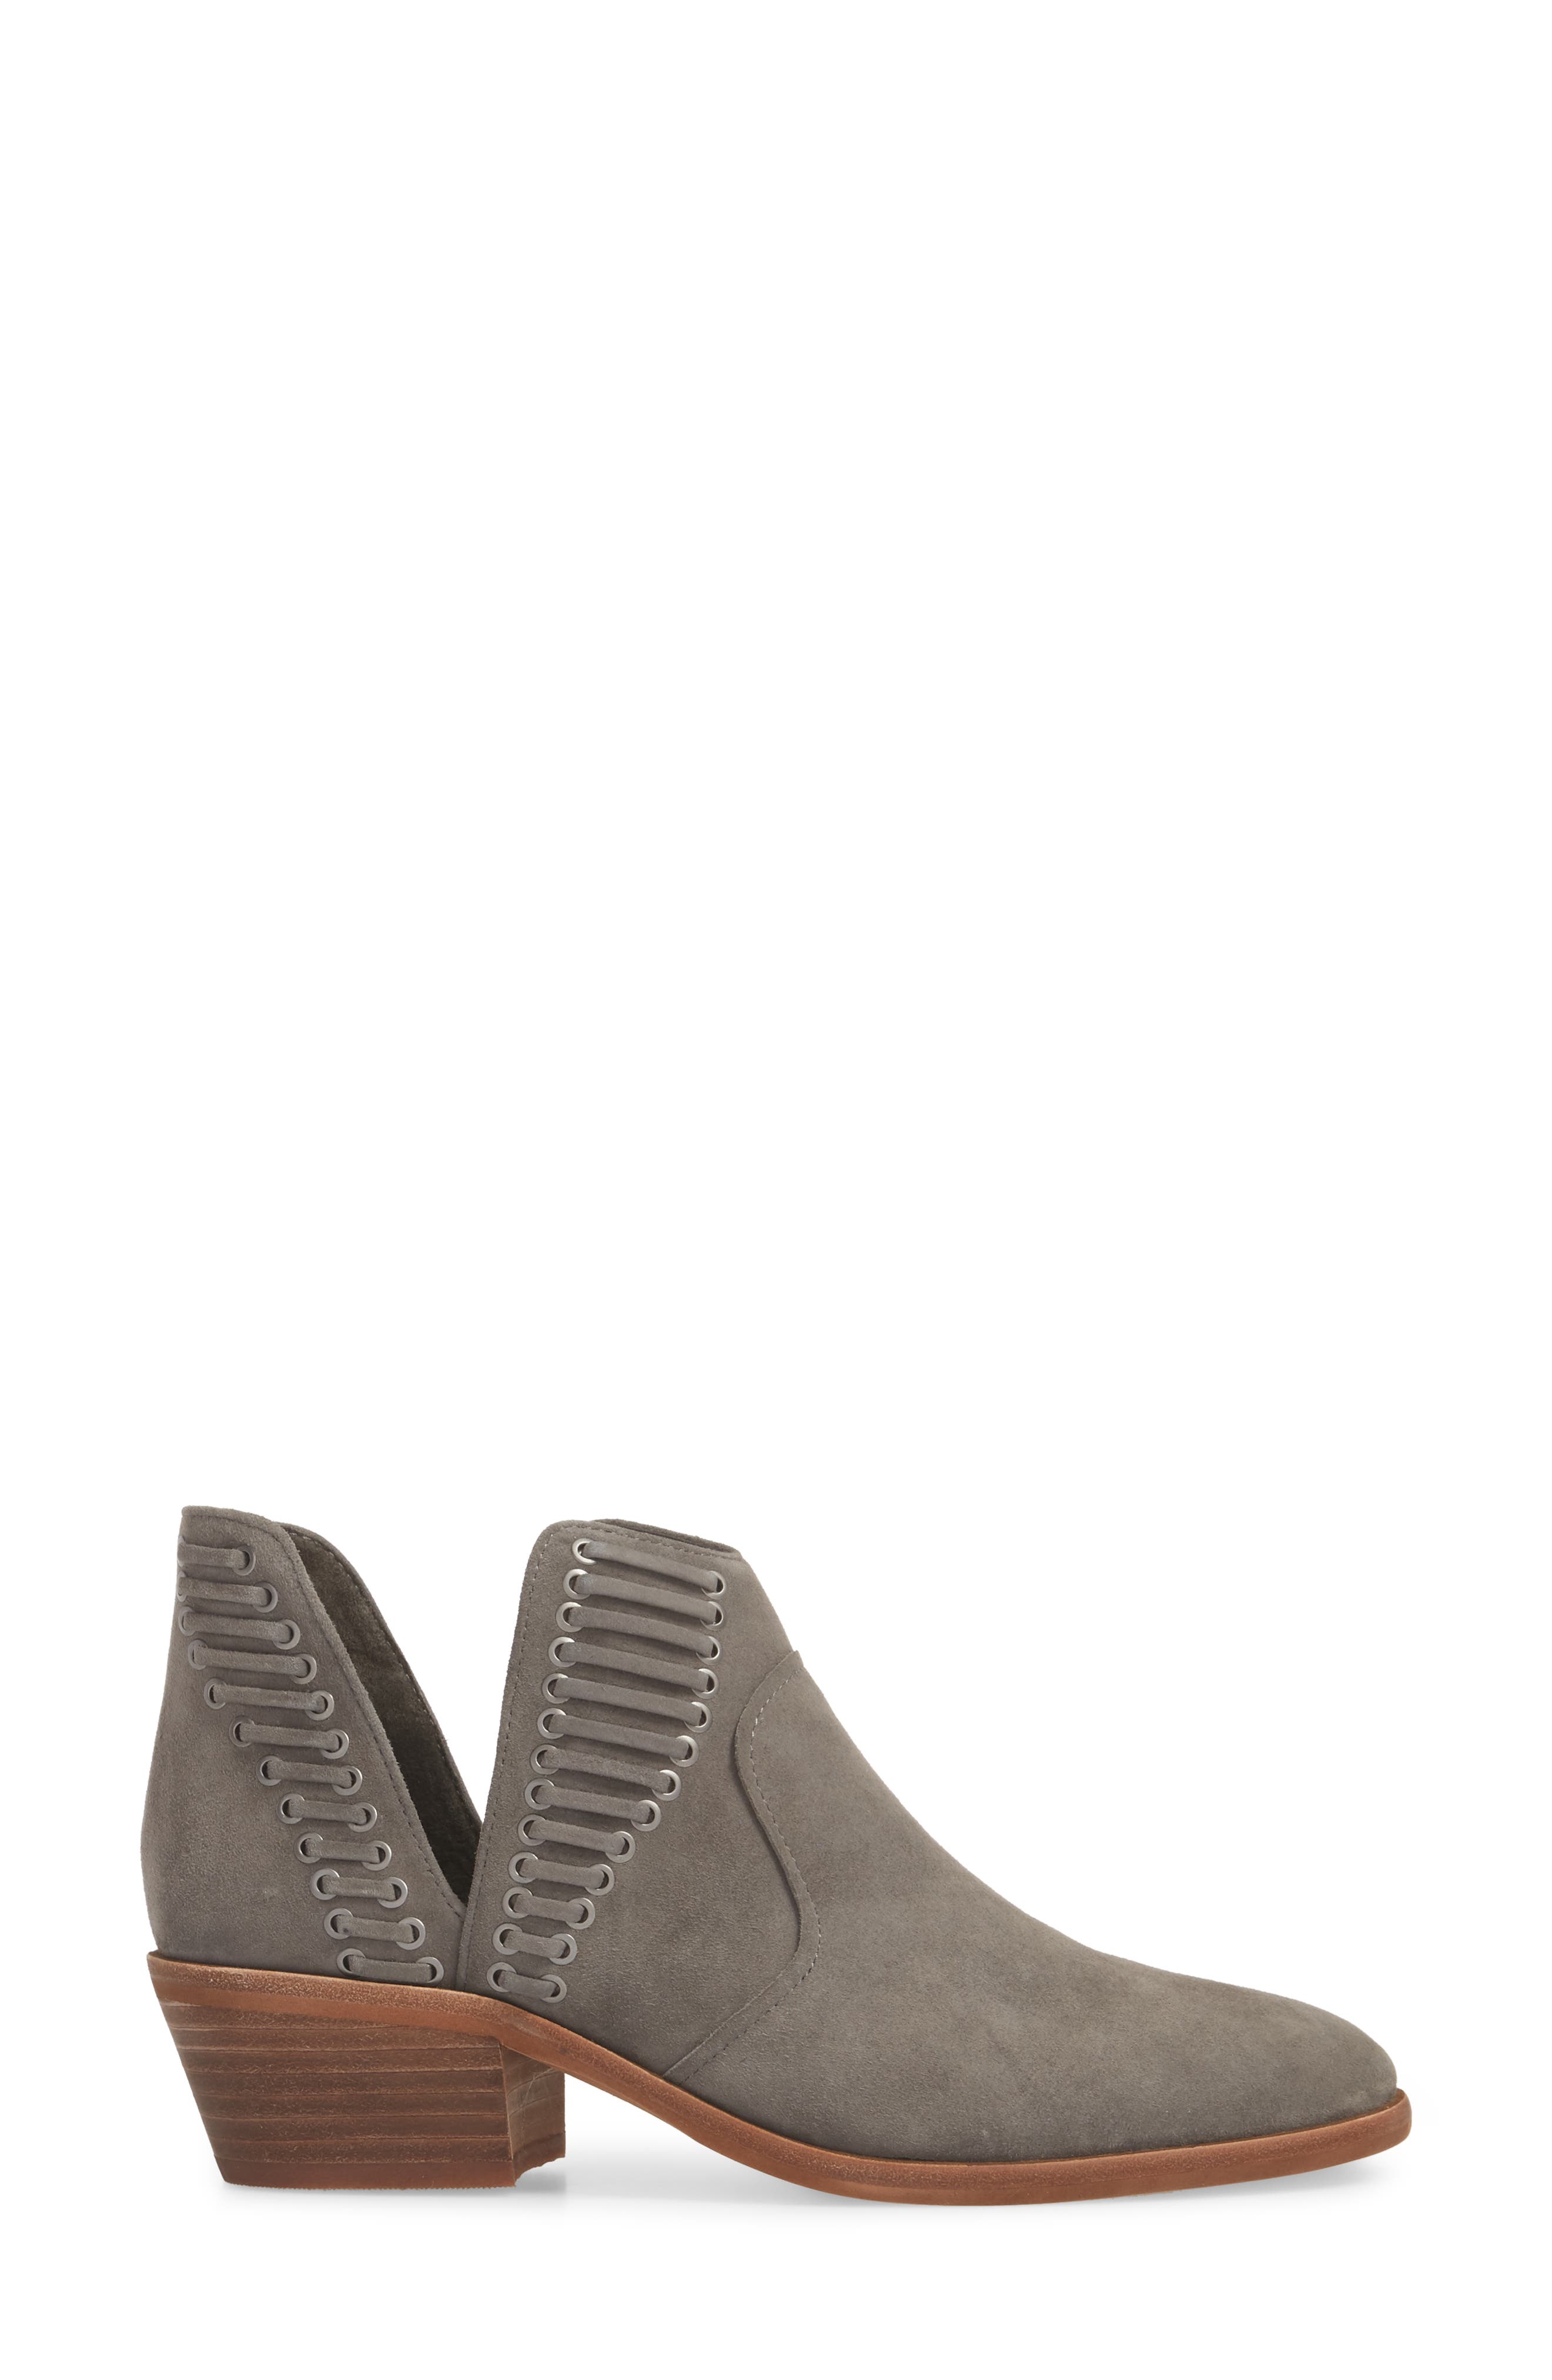 vince camuto wide width shoes